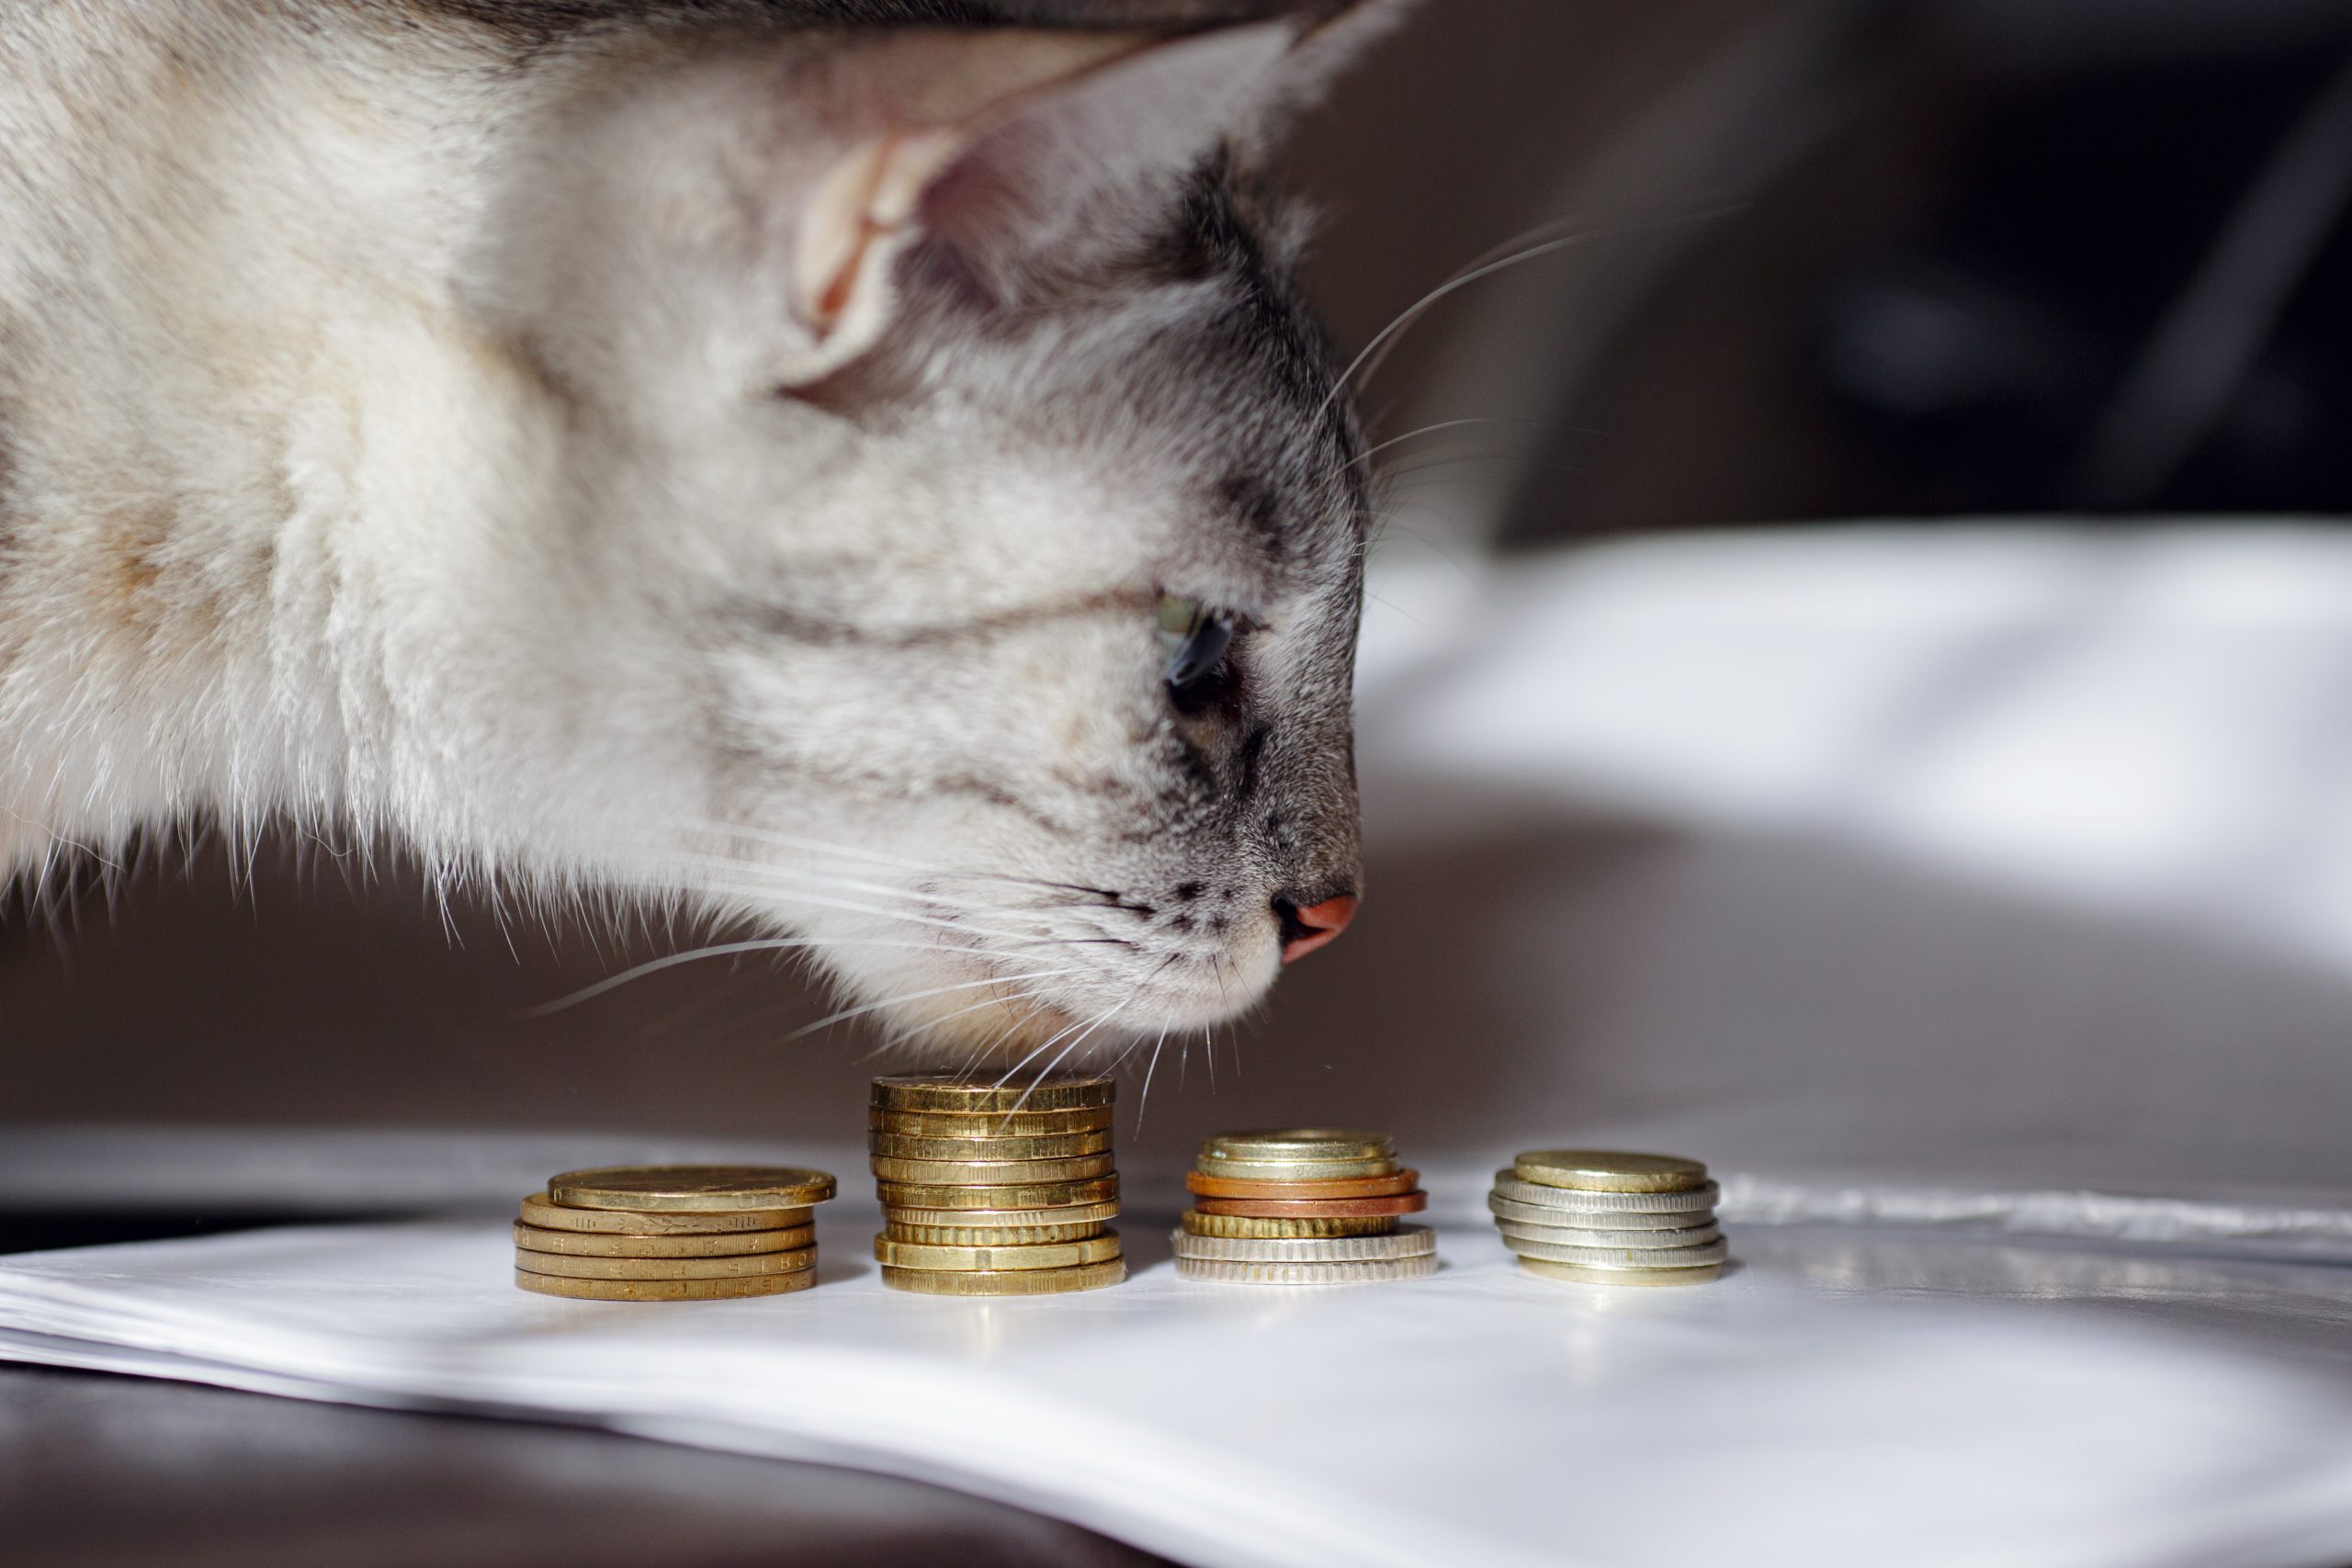 A grey cat watching stack of coins.